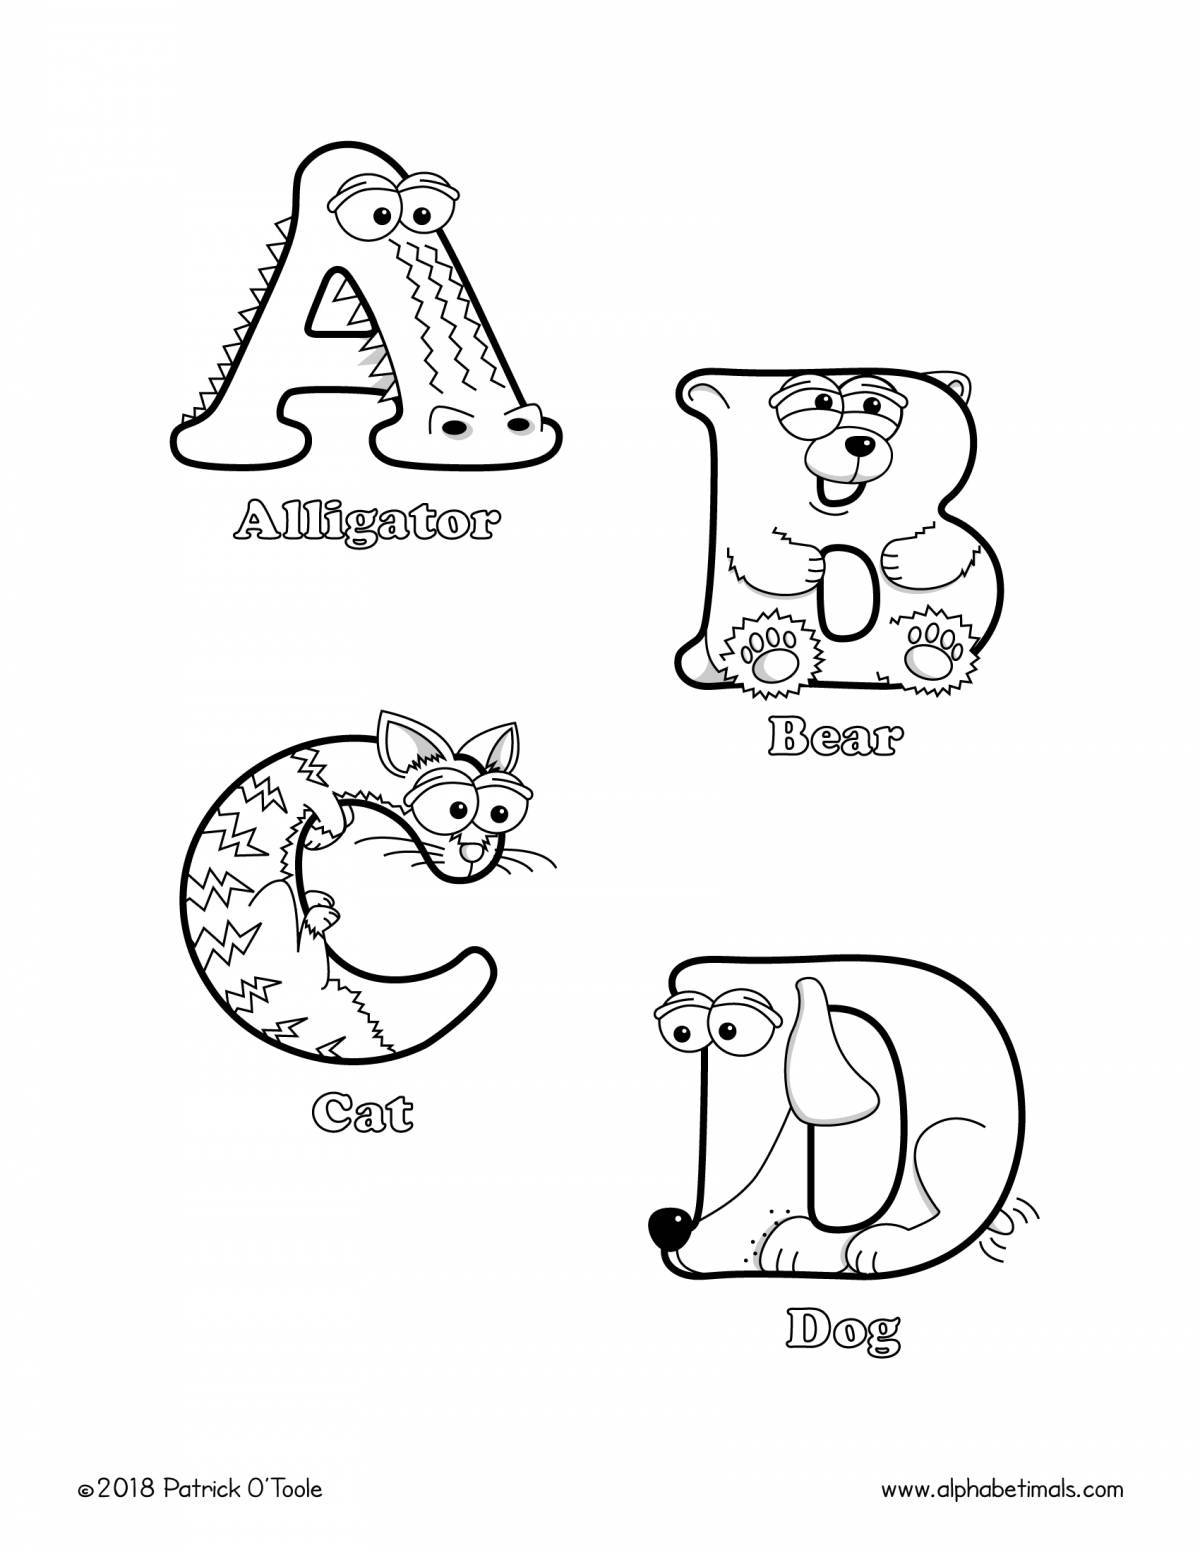 Coloring page laura with amazing alphabet